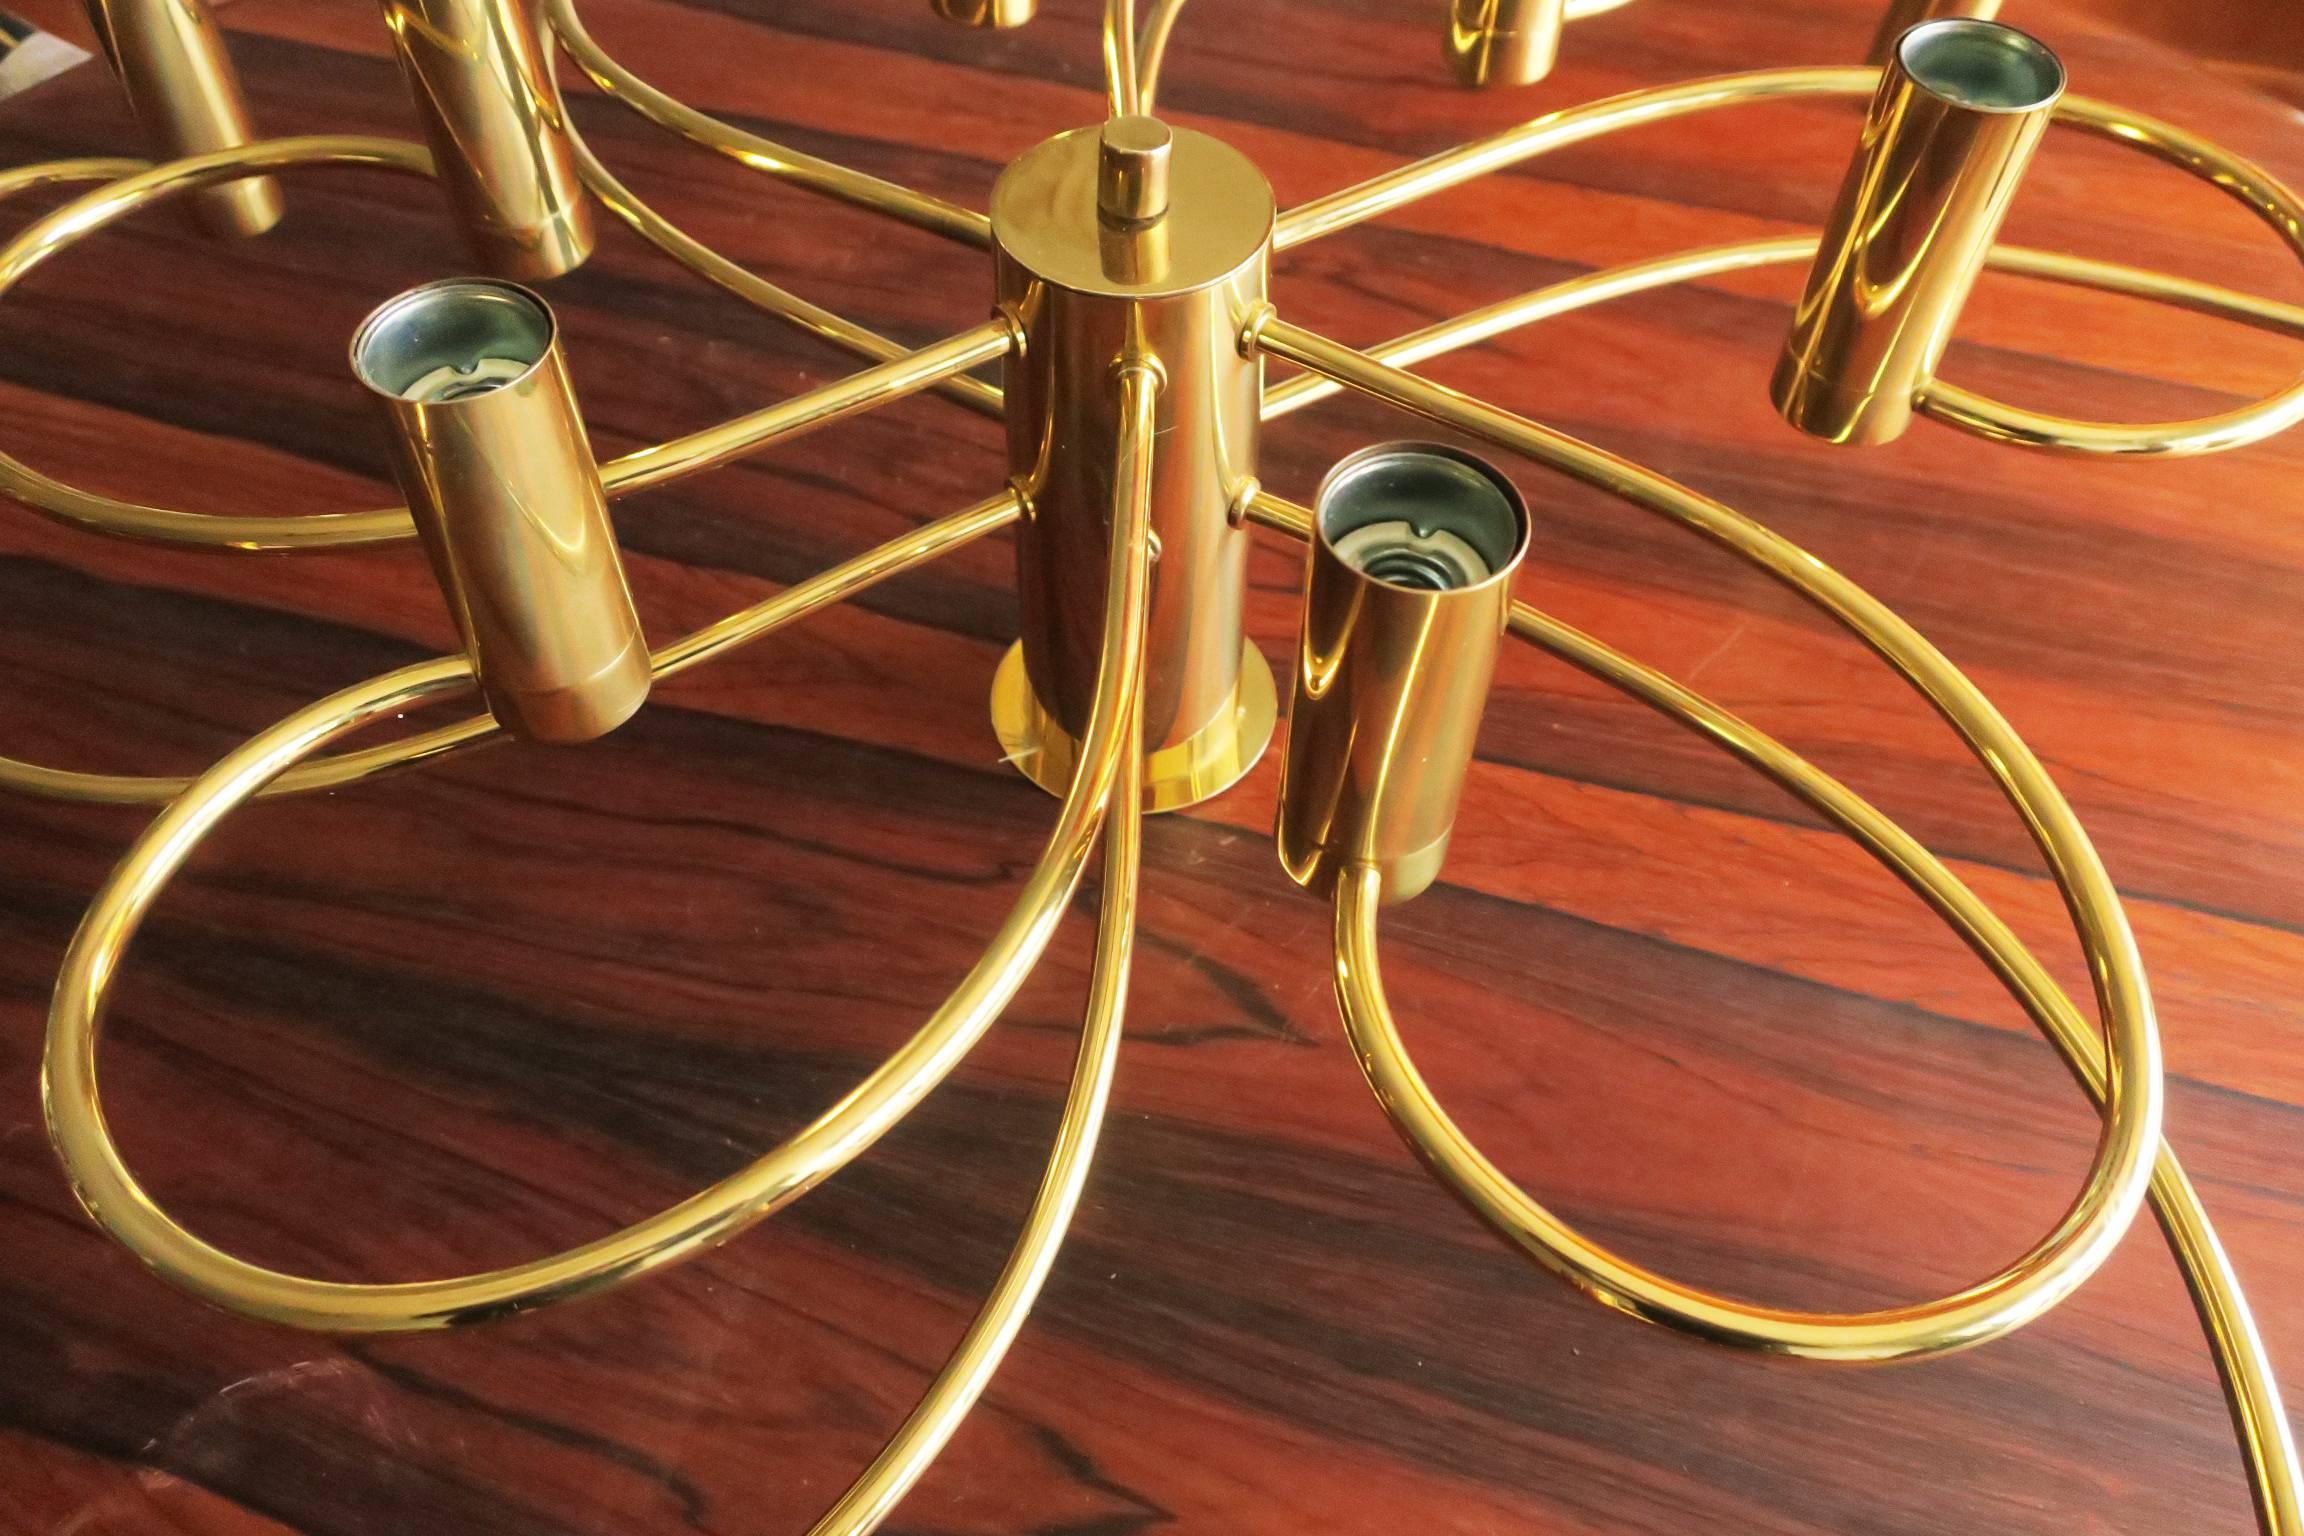 Honsel flush mount brass chandelier with two spiraling tiers,

Bulbs: If sold to the US or Canada the chandelier will be delivered with simple screw-in adapters to fit standard US candelabra bulbs.